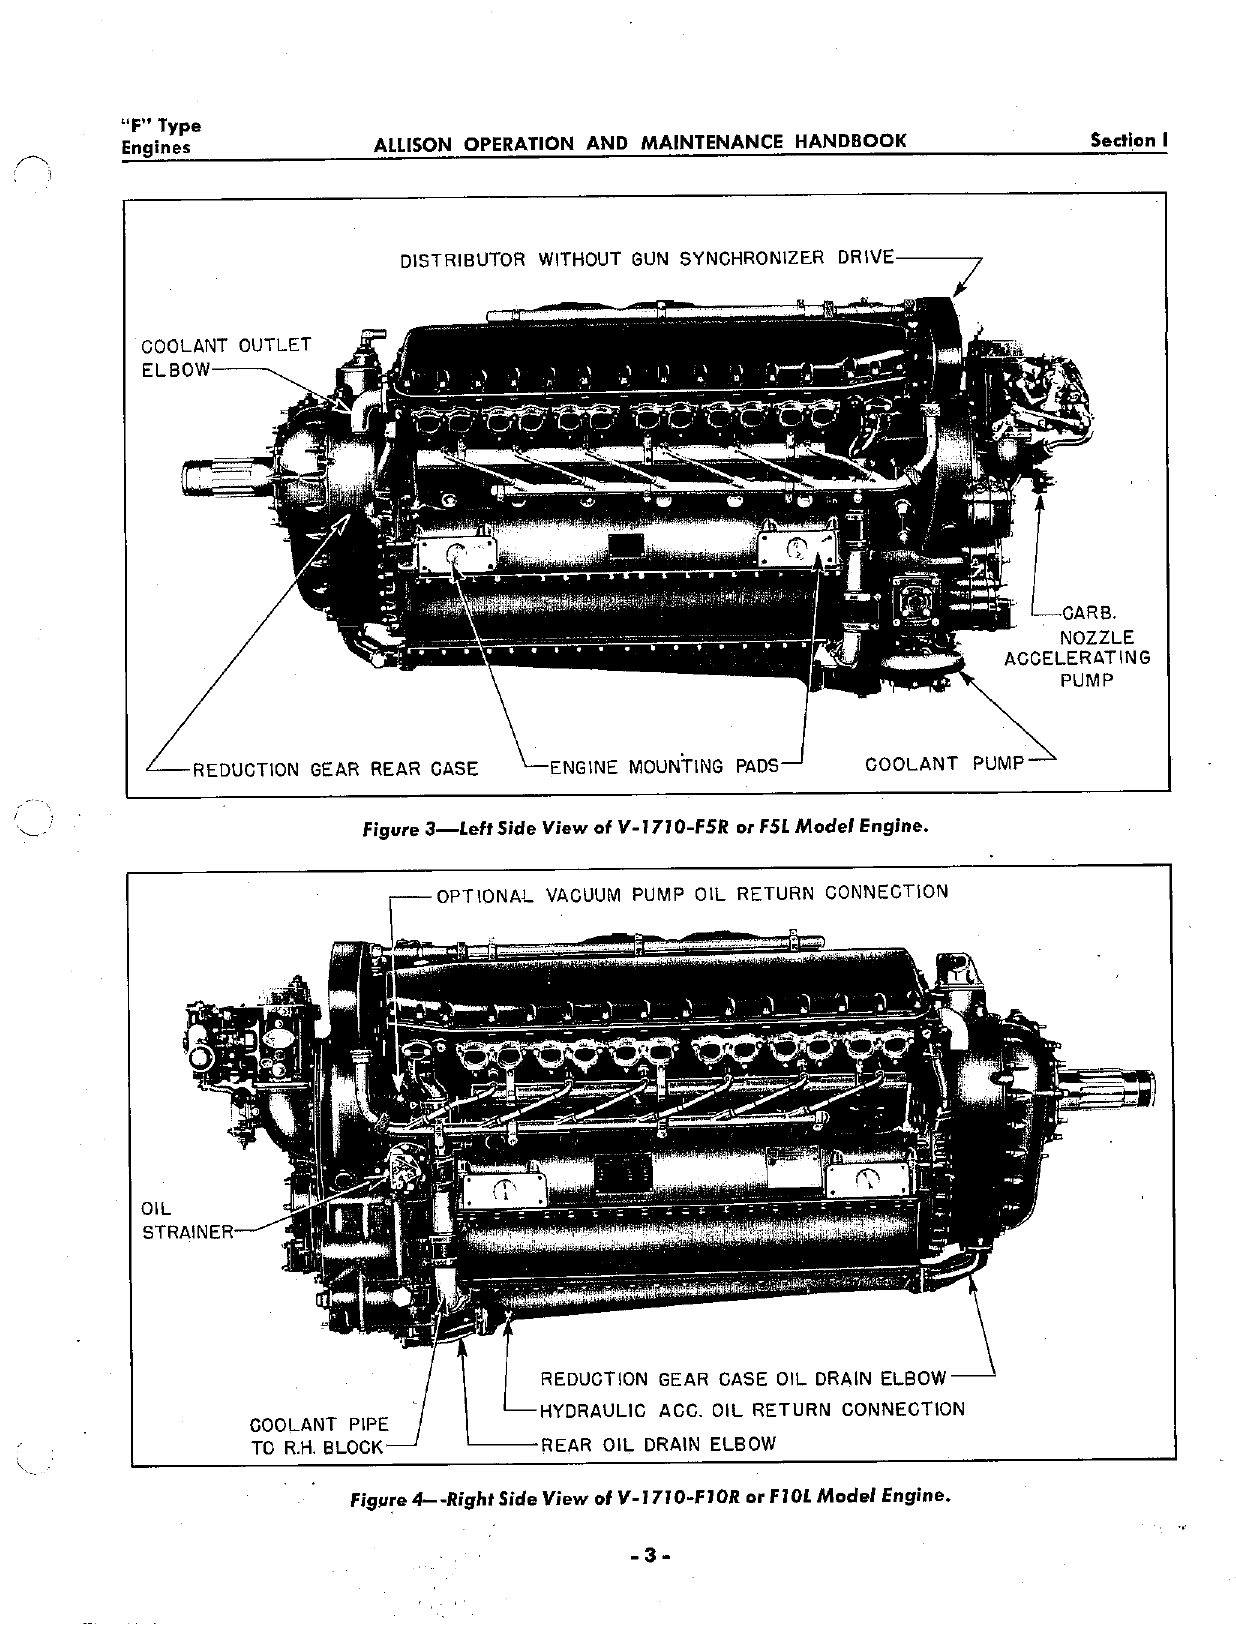 Sample page 9 from AirCorps Library document: Operation and Maintenance for Allison V-1710 F Type Engines - Third Edition